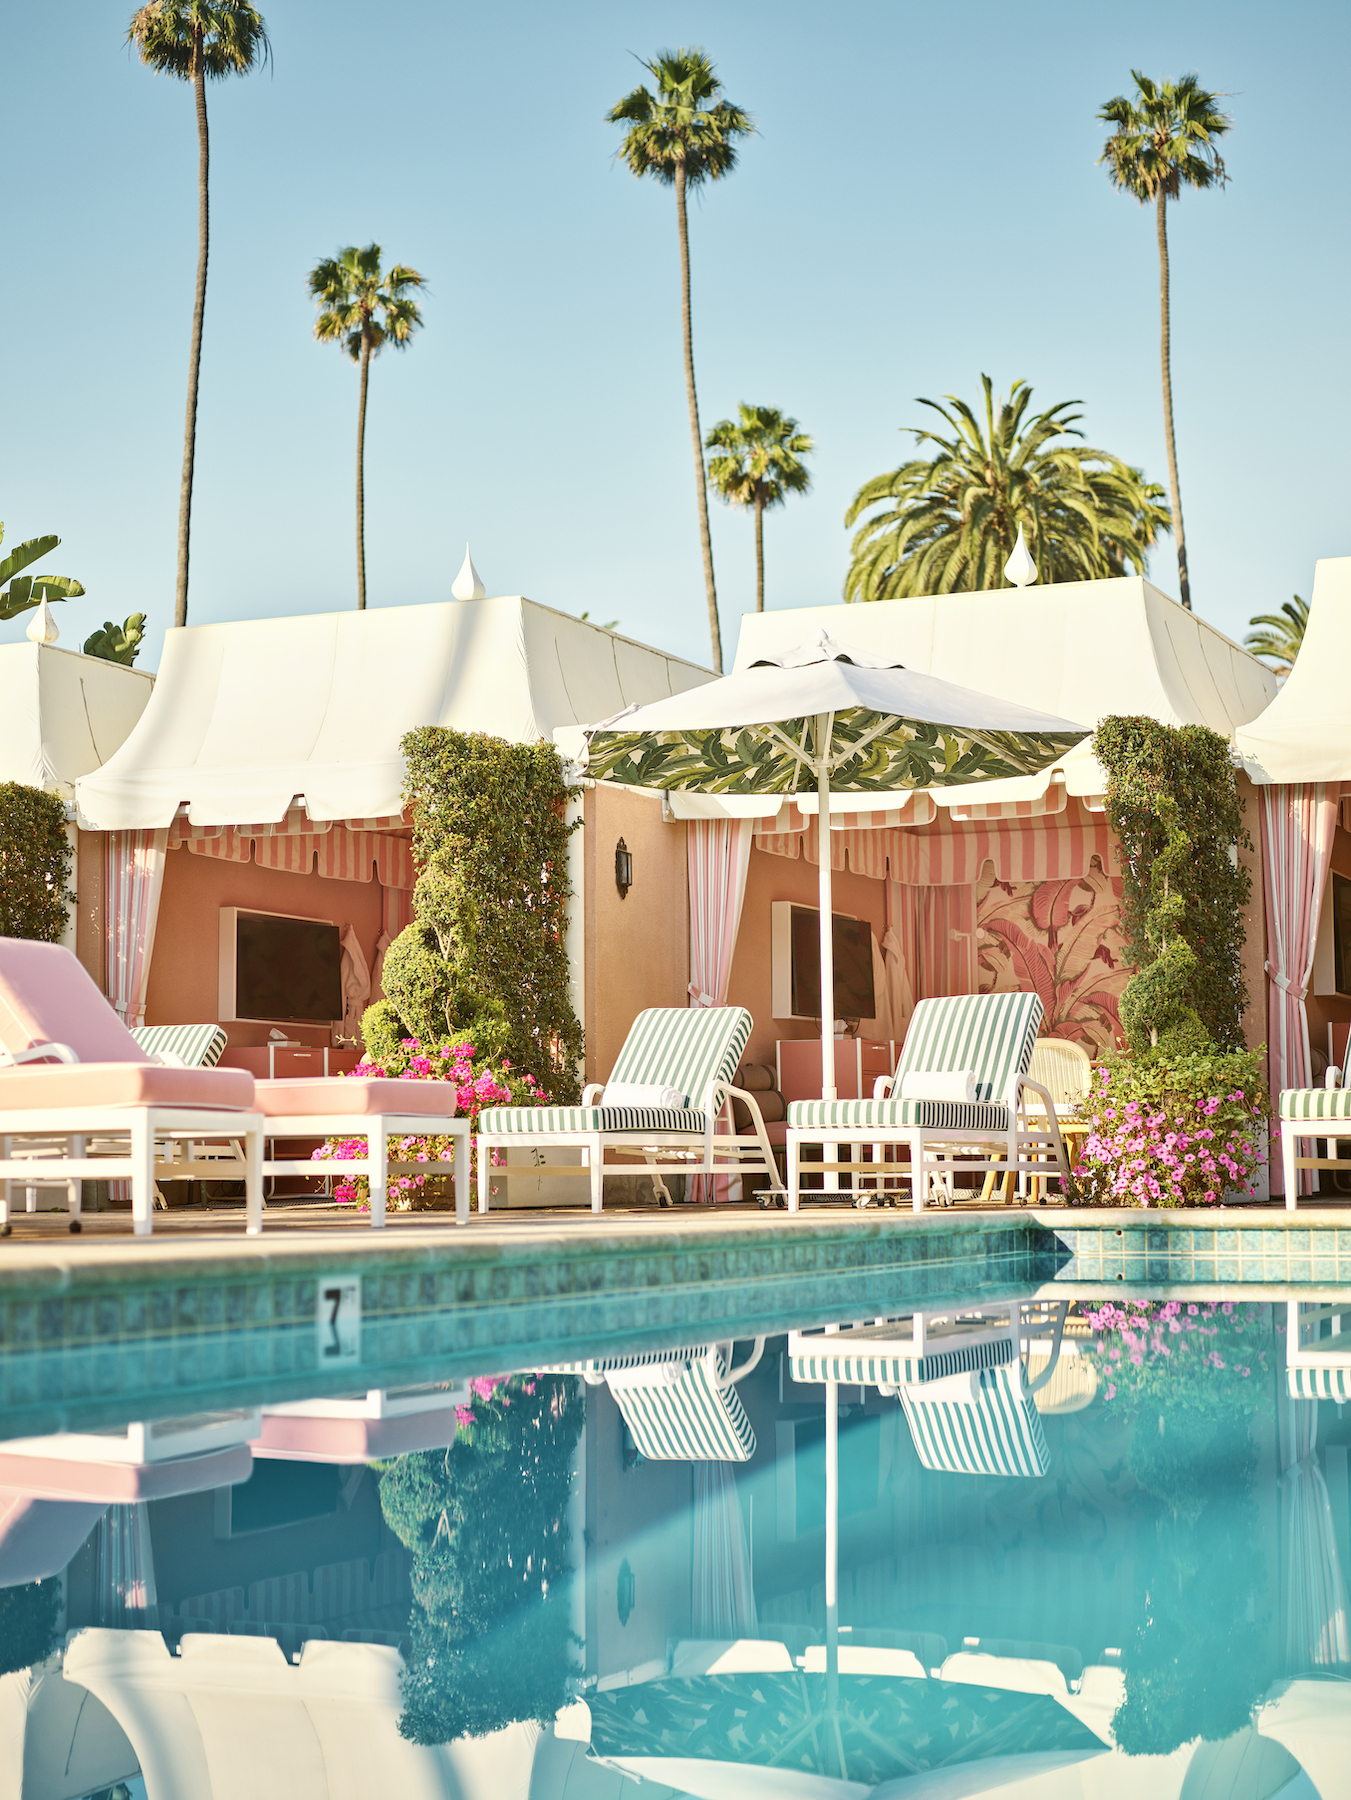 The glamorous cabanas of the Beverly Hills Hotel designed by Alexandra Champalimaud in Effect Magazine